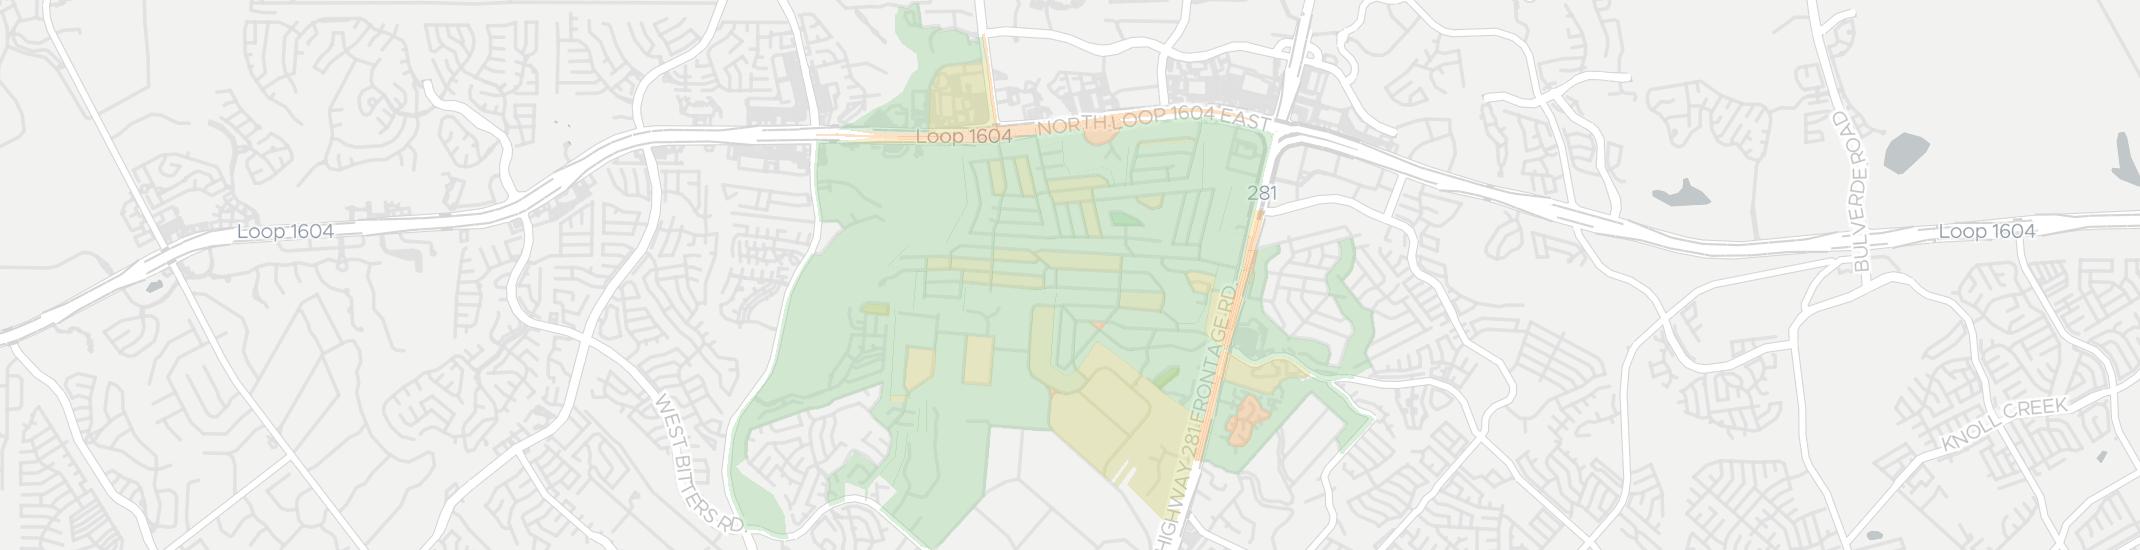 Hollywood Park Internet Competition Map. Click for interactive map.